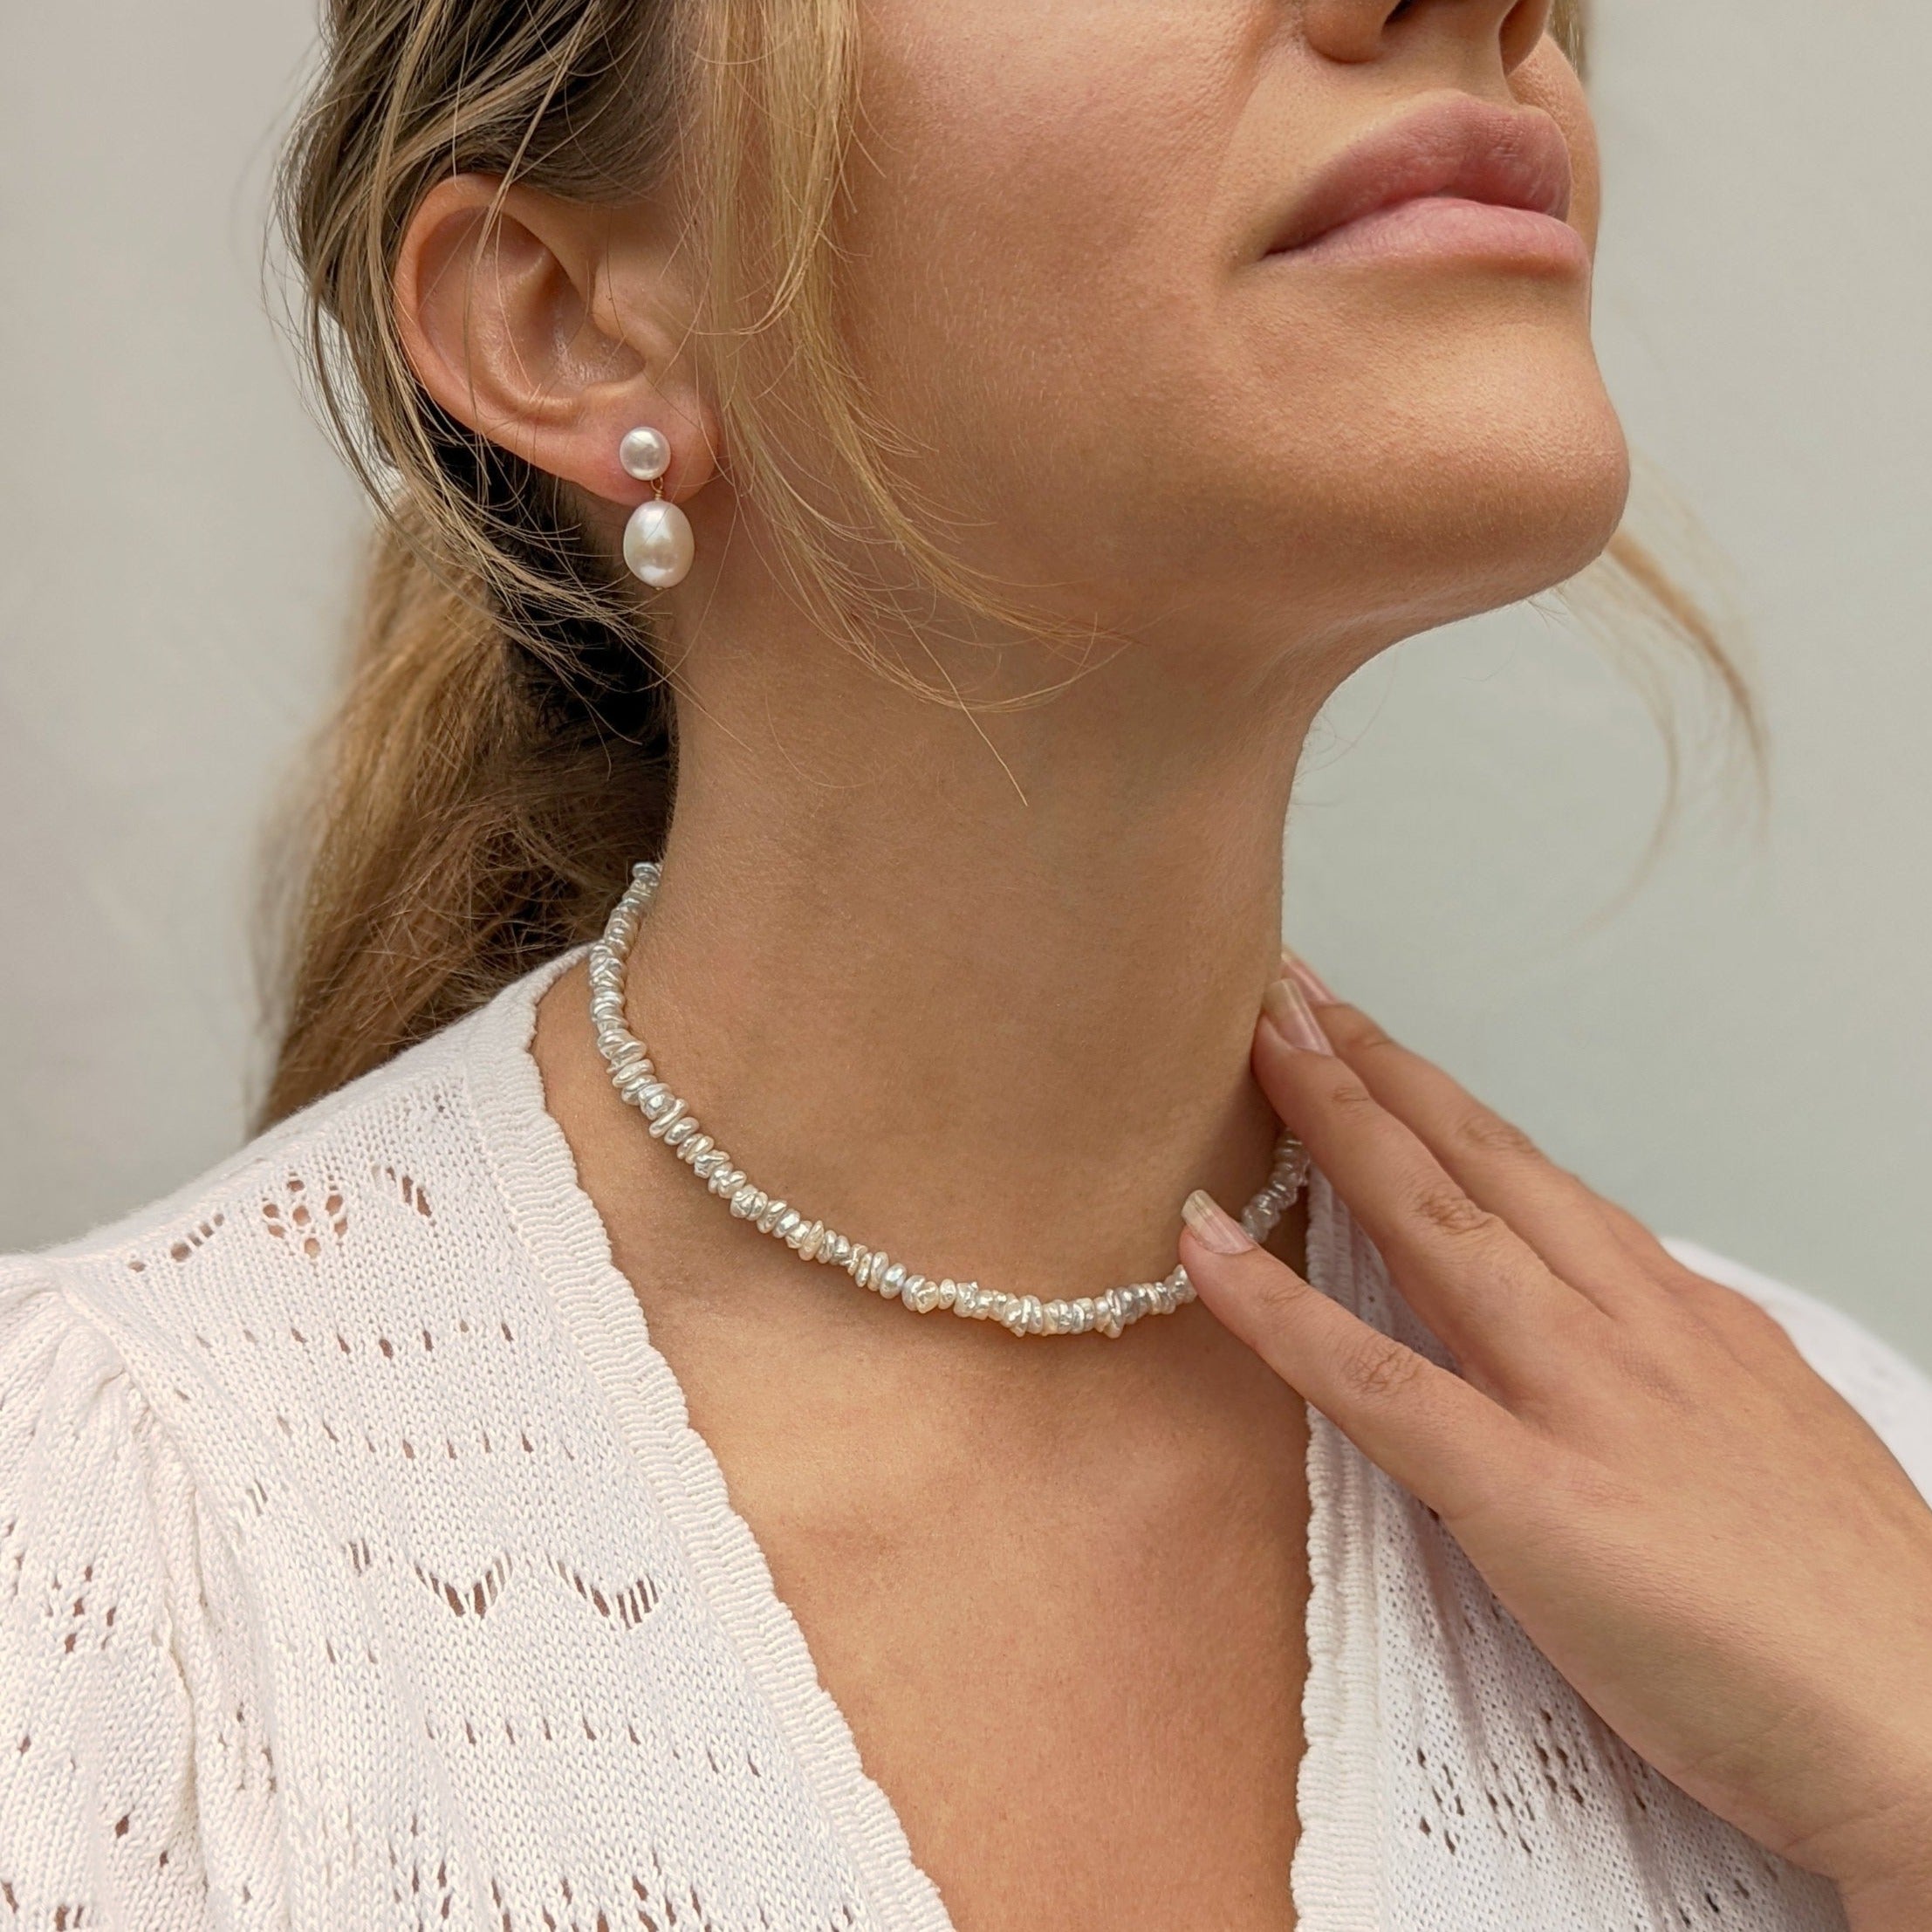 Model wearing pearl drop earrings and necklace